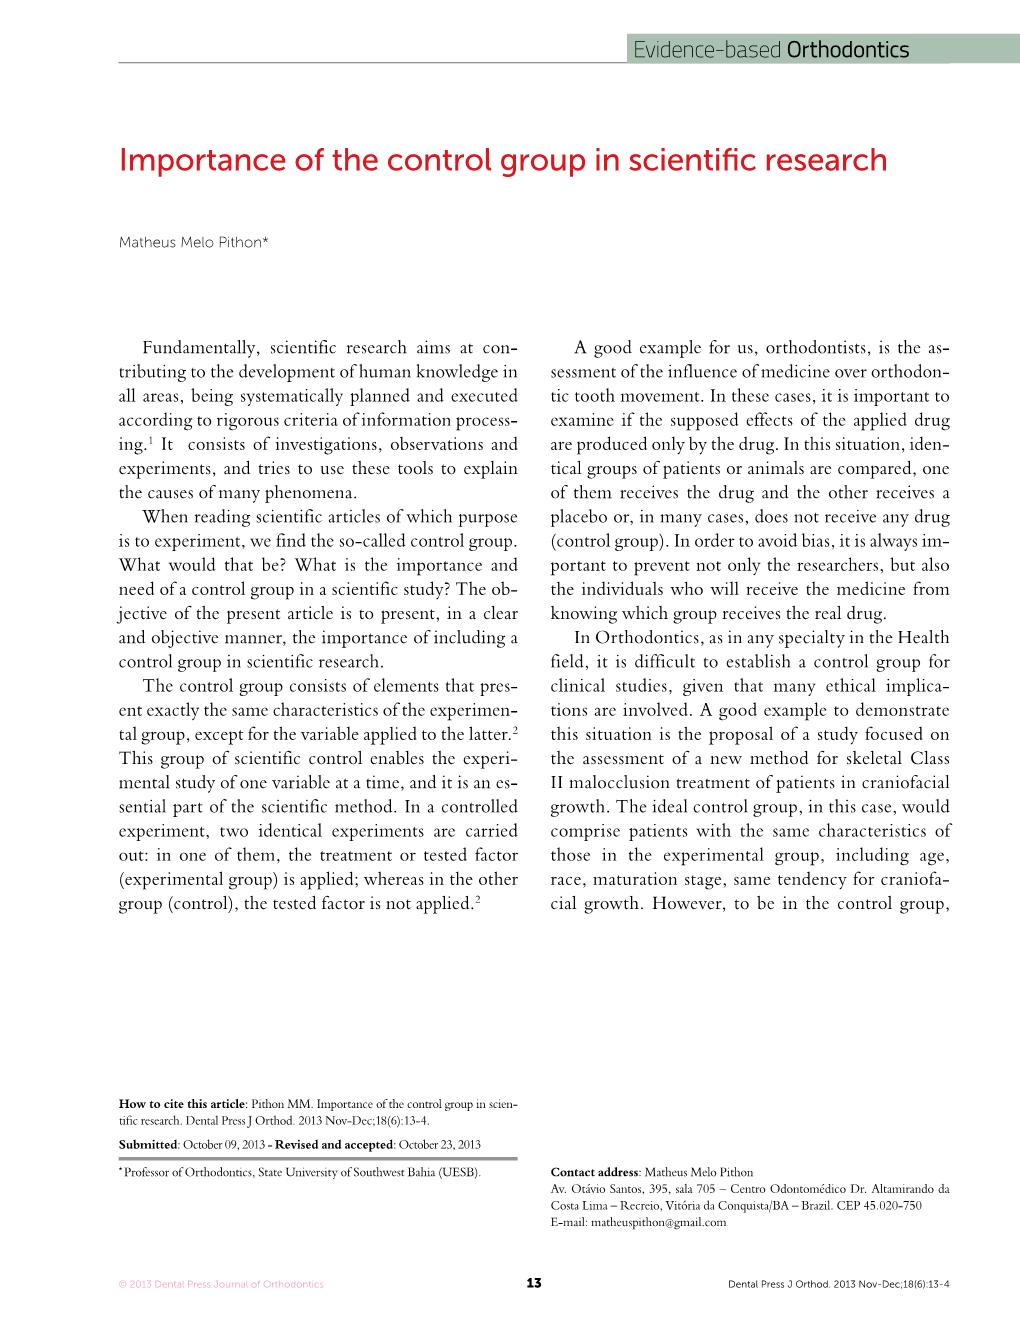 Importance of the Control Group in Scientific Research